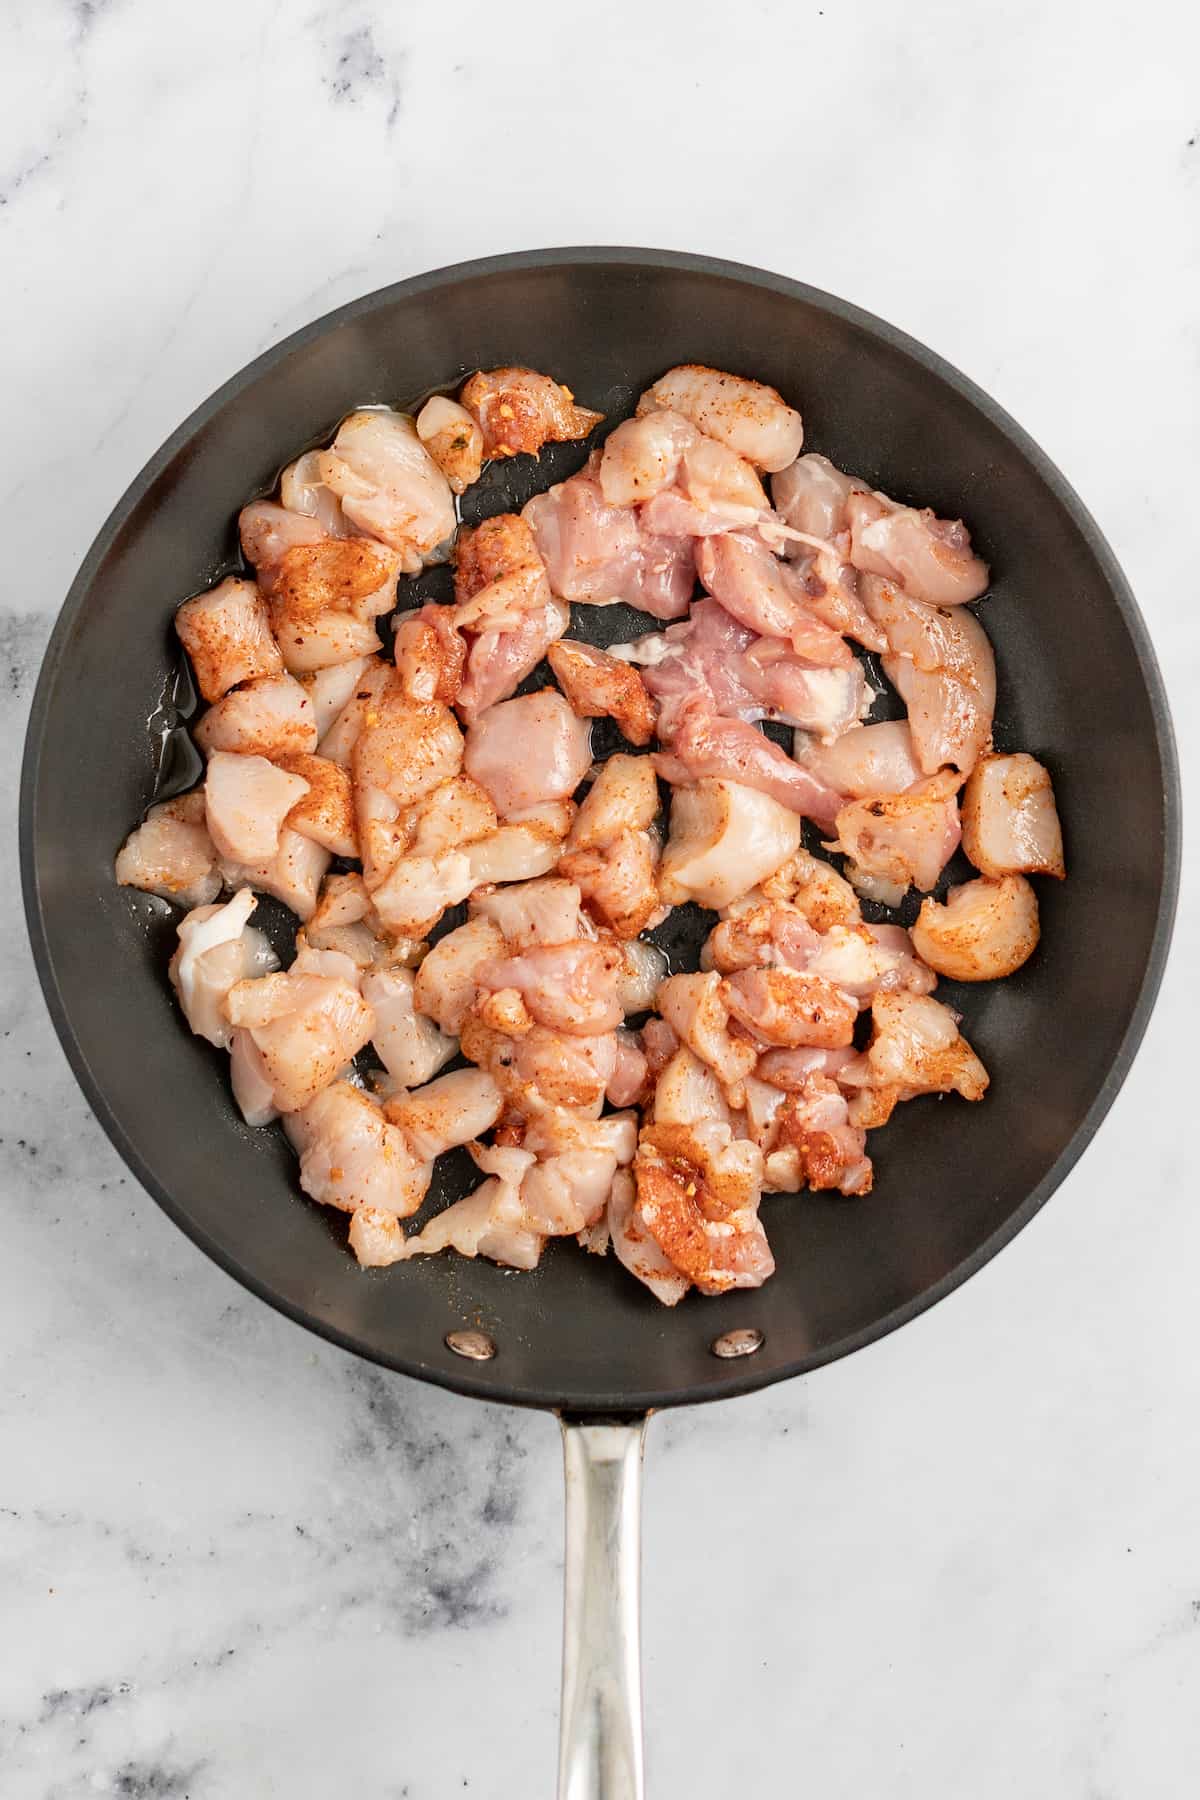 cooking bites of chicken in a saute pan that have been seasoned with spices